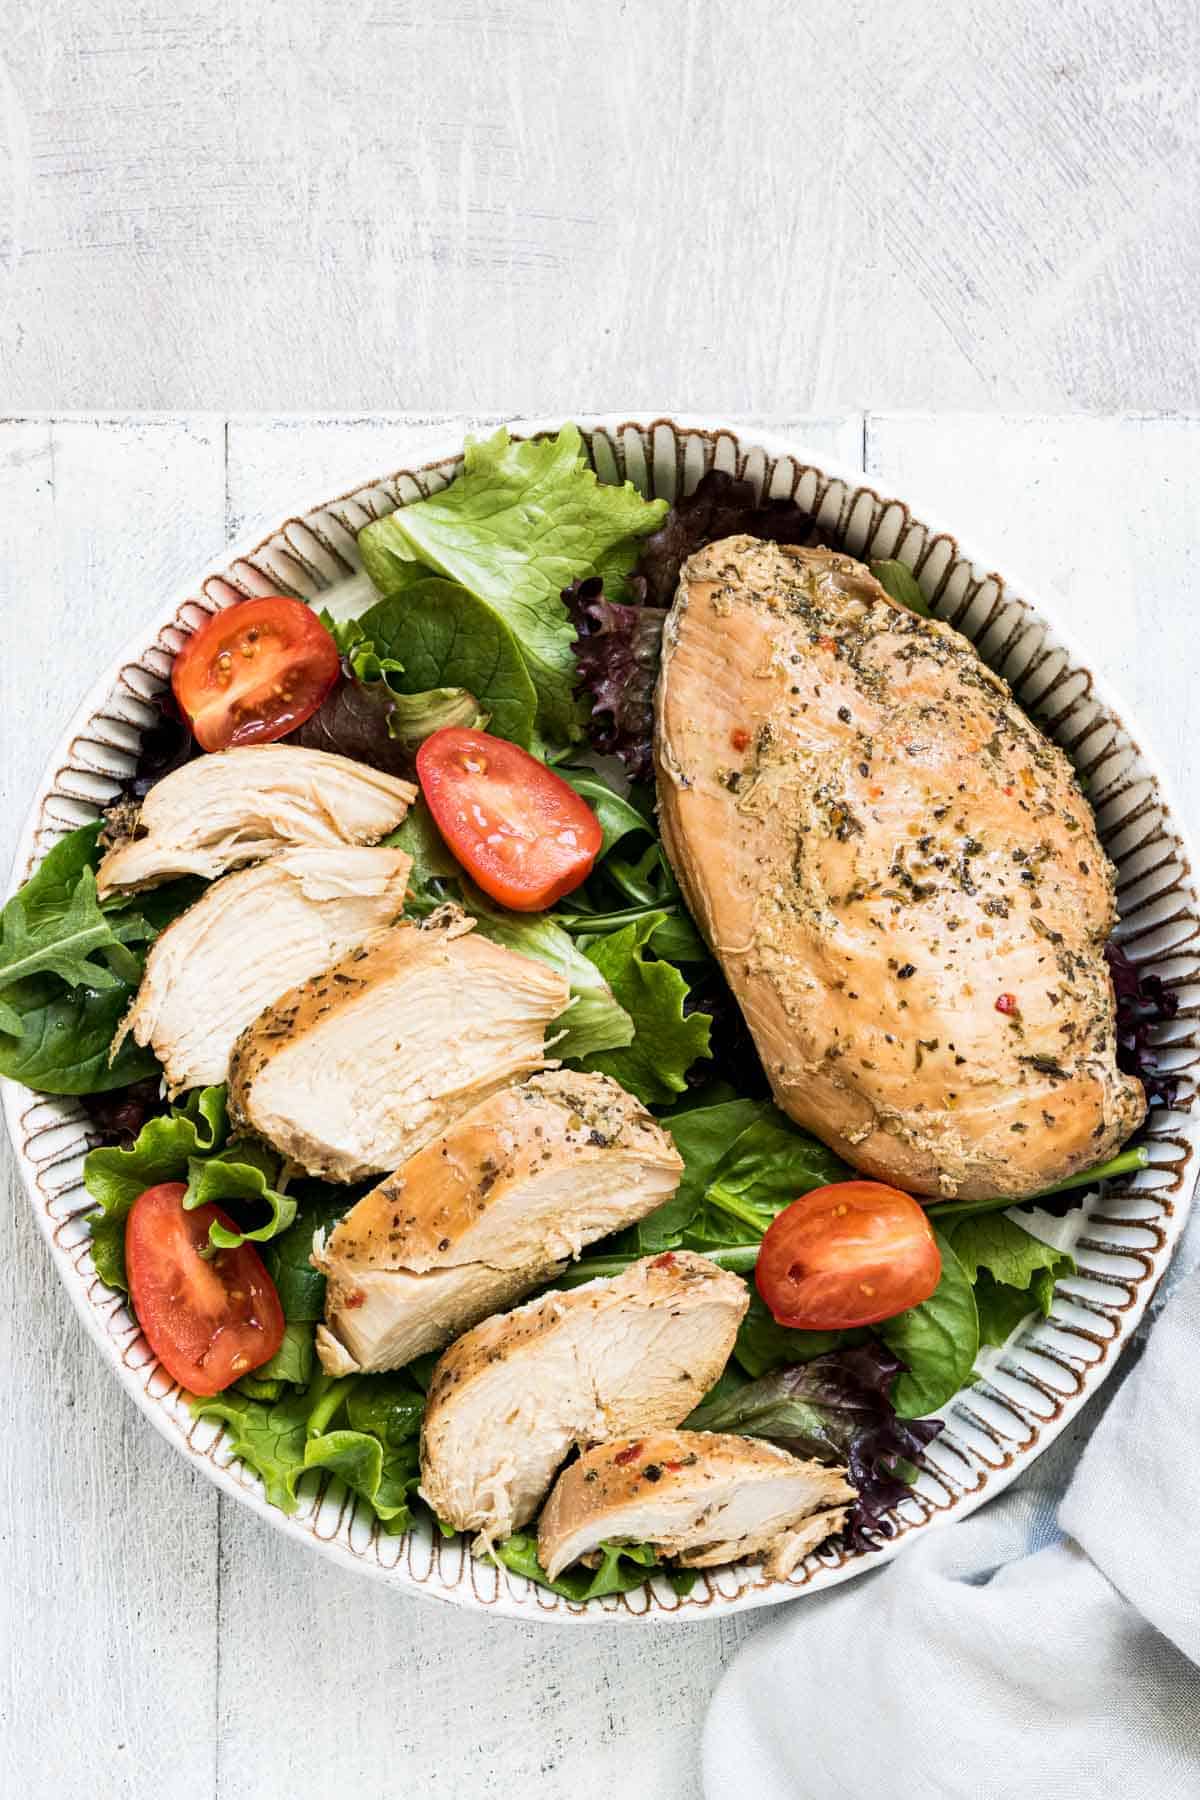 the finished instant pot frozen chicken breast recipe served on top of a green salad